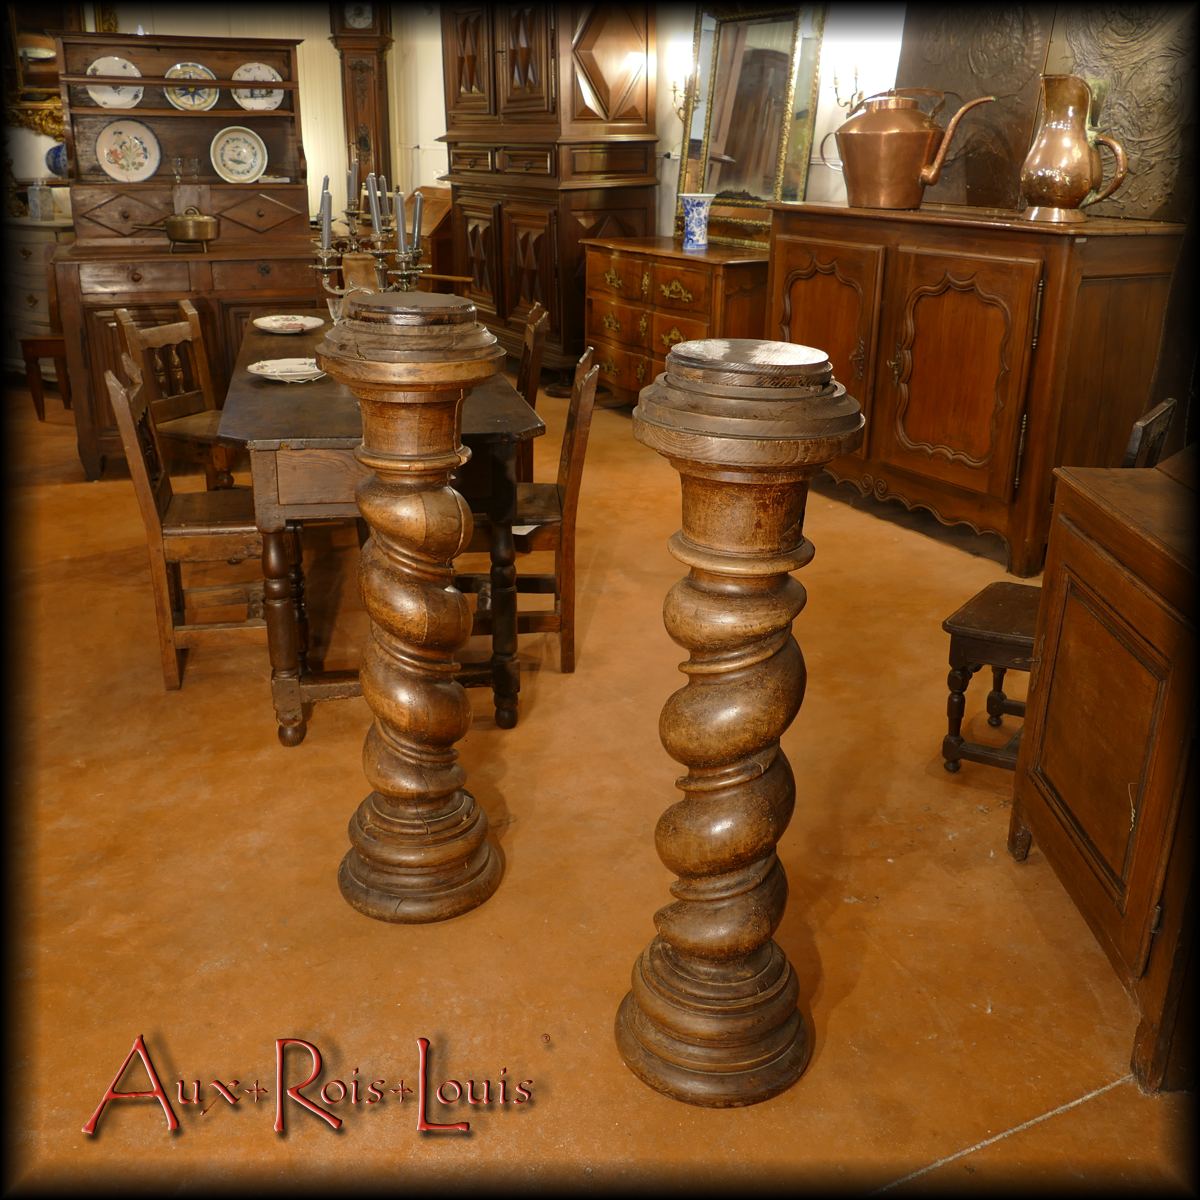 Here are two impressive twisted walnut columns from the 18th century. Initially, they adorned the base of the monumental staircase in a public building located in the Midi-Pyrénées region. Now, they are prepared to enhance the charm of a film set or a private residence.